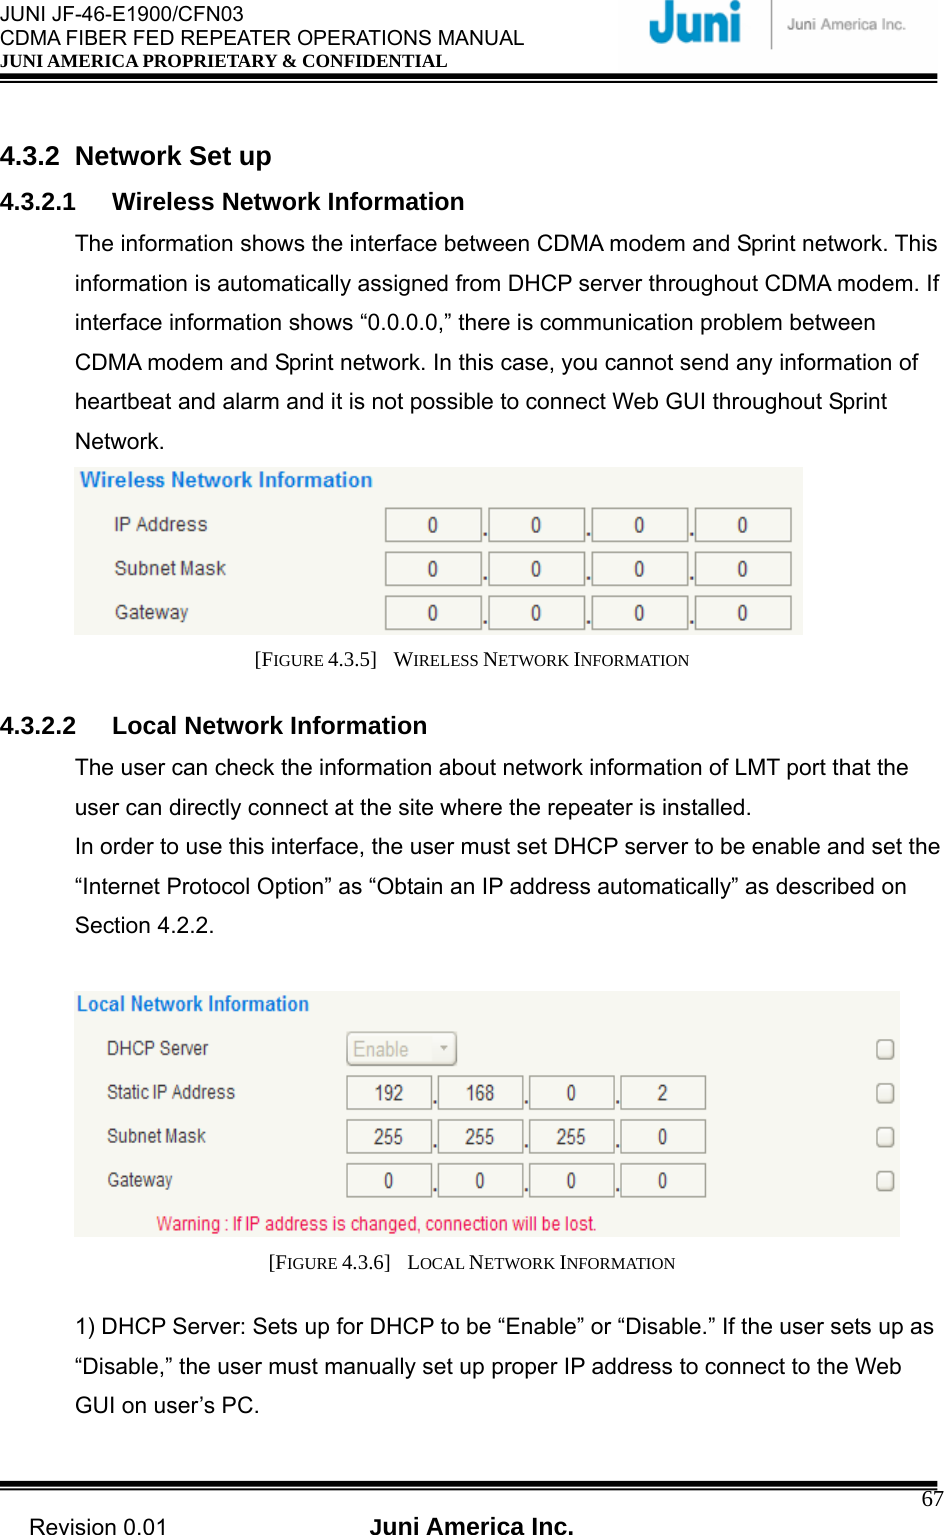  JUNI JF-46-E1900/CFN03 CDMA FIBER FED REPEATER OPERATIONS MANUAL JUNI AMERICA PROPRIETARY &amp; CONFIDENTIAL                                   Revision 0.01  Juni America Inc.  67 4.3.2 Network Set up 4.3.2.1  Wireless Network Information The information shows the interface between CDMA modem and Sprint network. This information is automatically assigned from DHCP server throughout CDMA modem. If interface information shows “0.0.0.0,” there is communication problem between CDMA modem and Sprint network. In this case, you cannot send any information of heartbeat and alarm and it is not possible to connect Web GUI throughout Sprint Network.  [FIGURE 4.3.5]  WIRELESS NETWORK INFORMATION  4.3.2.2  Local Network Information The user can check the information about network information of LMT port that the user can directly connect at the site where the repeater is installed. In order to use this interface, the user must set DHCP server to be enable and set the “Internet Protocol Option” as “Obtain an IP address automatically” as described on Section 4.2.2.     [FIGURE 4.3.6]  LOCAL NETWORK INFORMATION  1) DHCP Server: Sets up for DHCP to be “Enable” or “Disable.” If the user sets up as “Disable,” the user must manually set up proper IP address to connect to the Web GUI on user’s PC.  